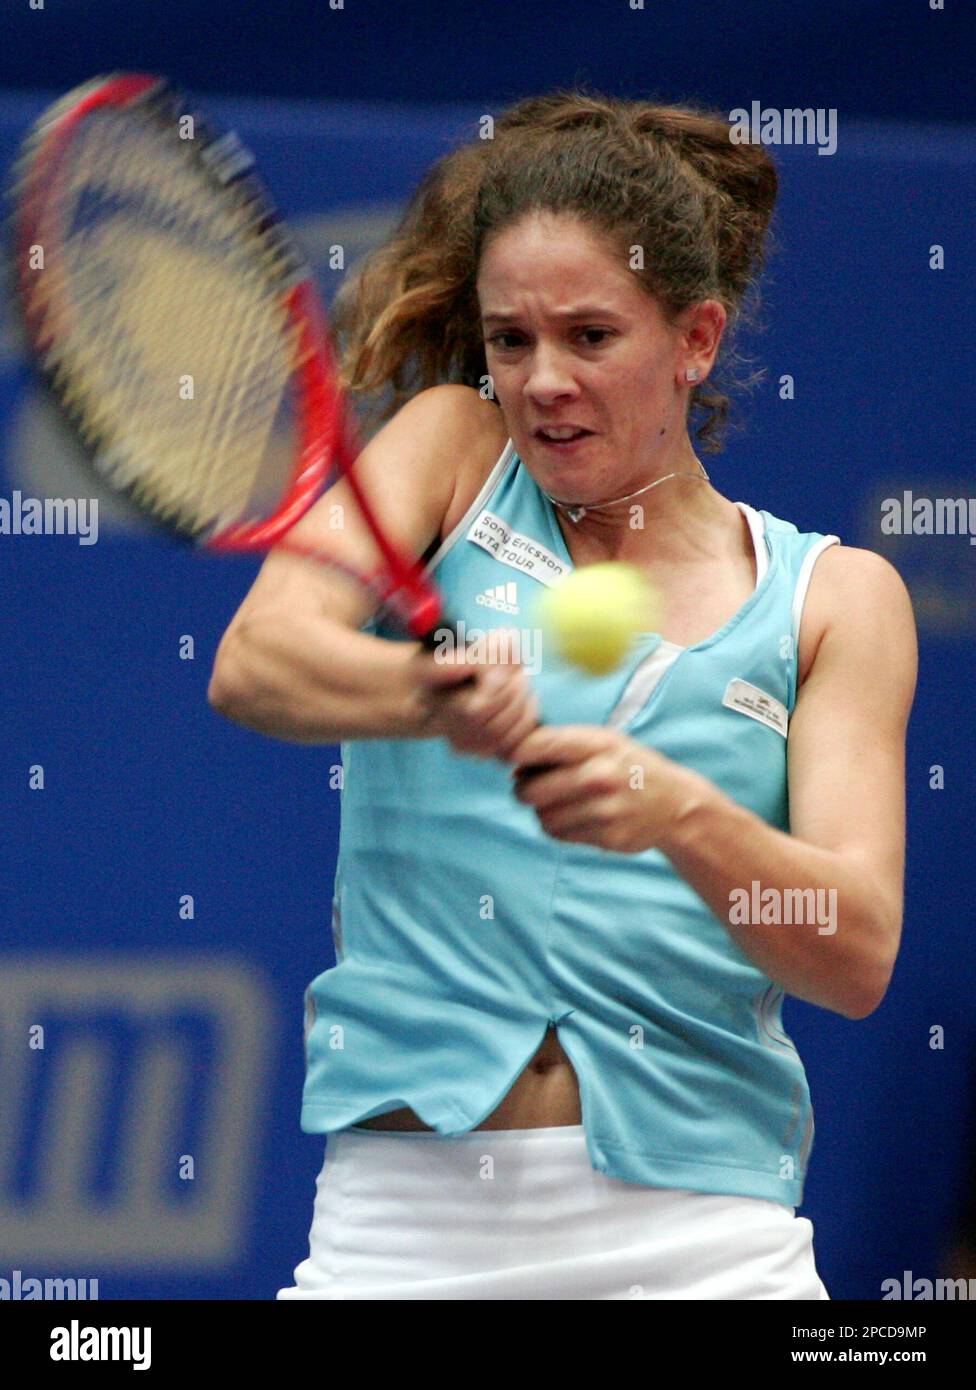 Switzerland's Patty Schnyder returns the ball to Nathalie Dechy from France  during their second round match of the Generali Ladies WTA tennis tournament  in Linz, Austria, on Thursday, Oct. 26, 2006. (AP